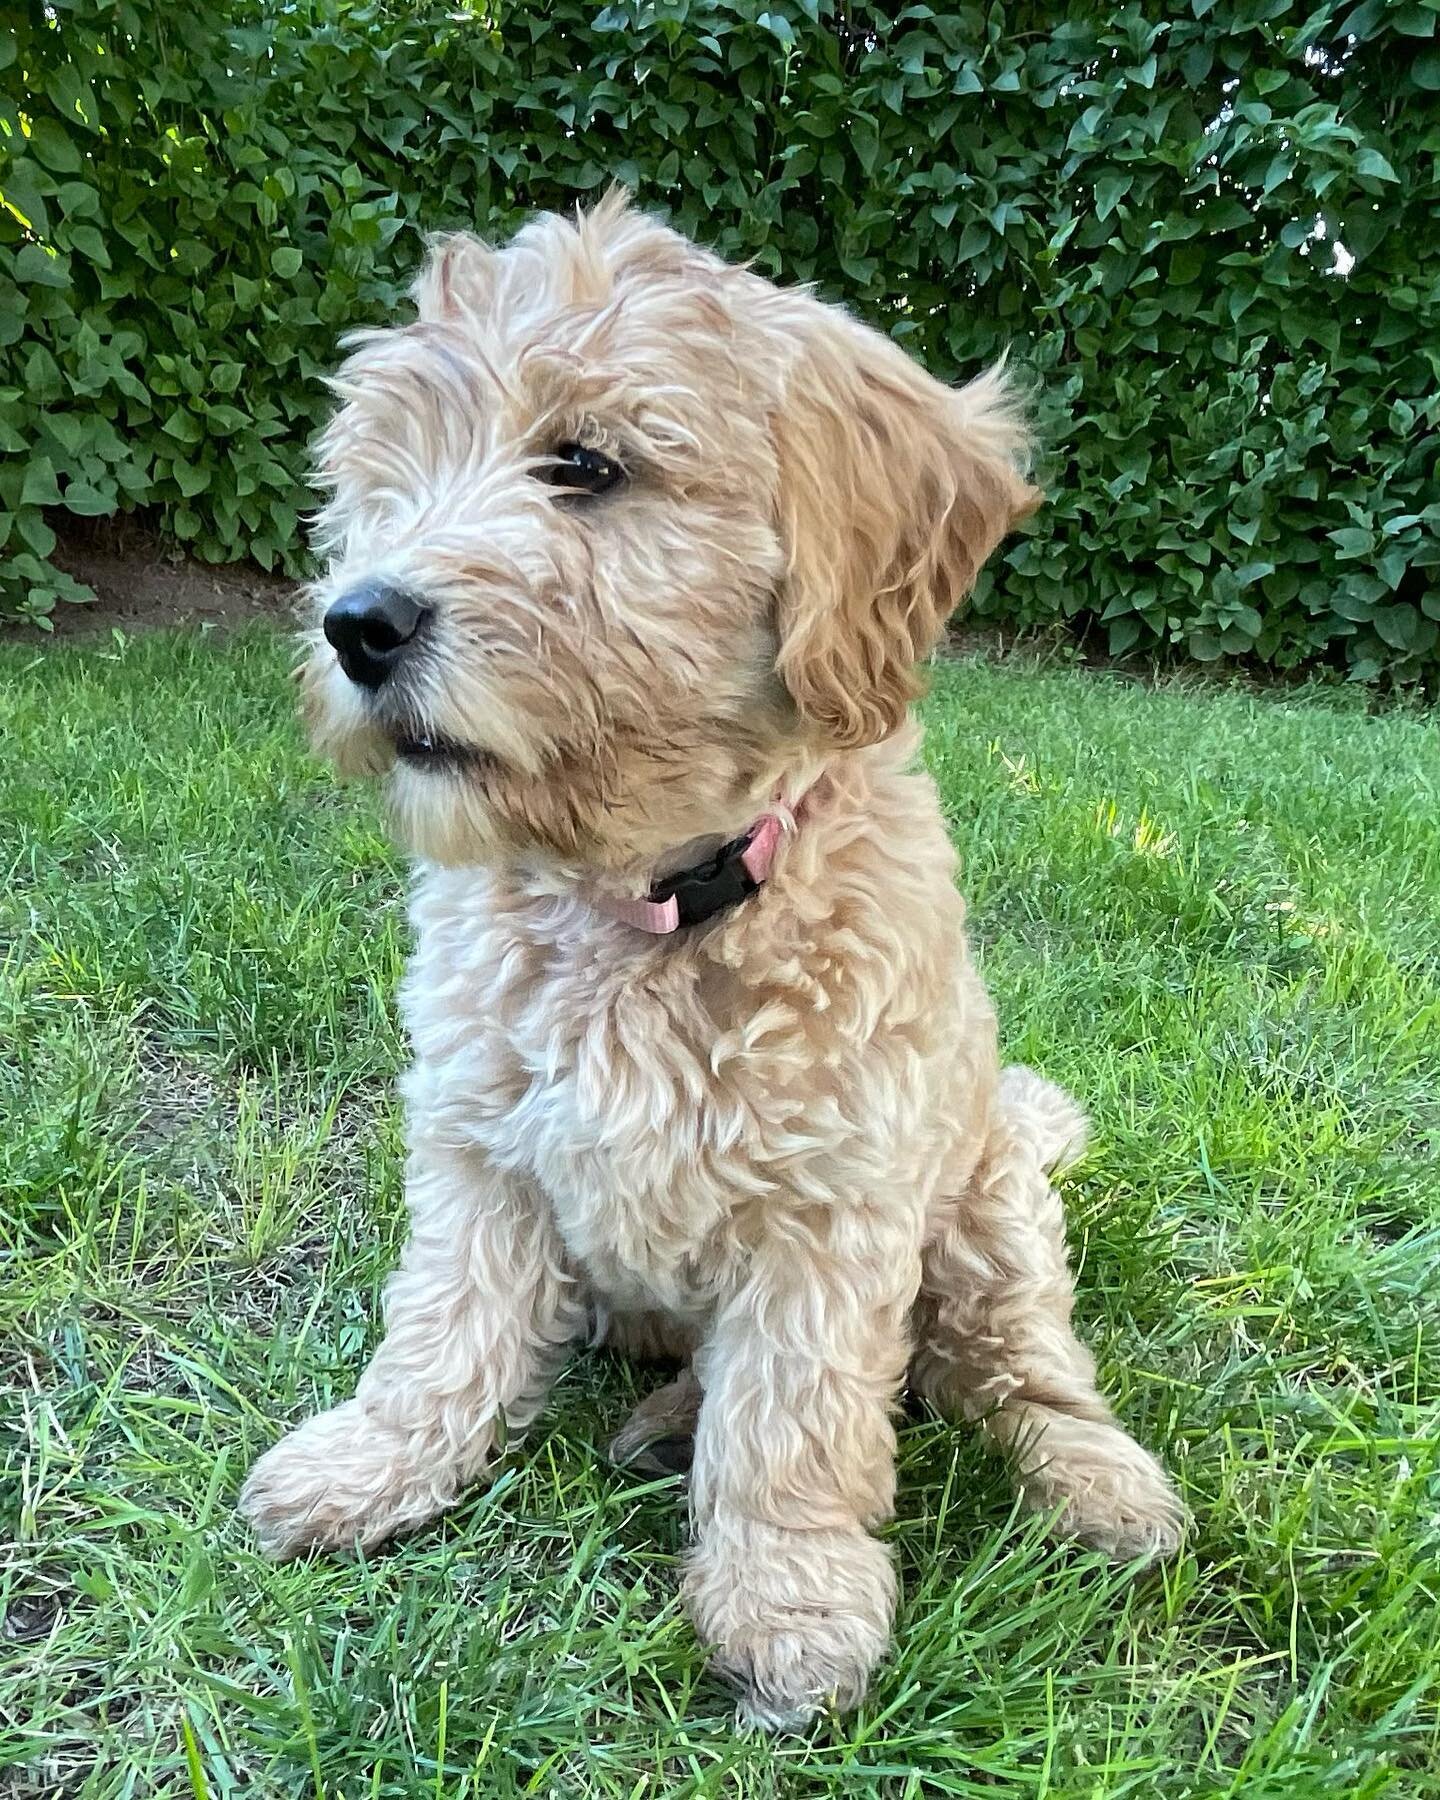 What&rsquo;s one more dog on the farm!! Introducing Luna❤️❤️ #peachesncreamdoodles #doubledoodle #doubledoodlesofinstagram